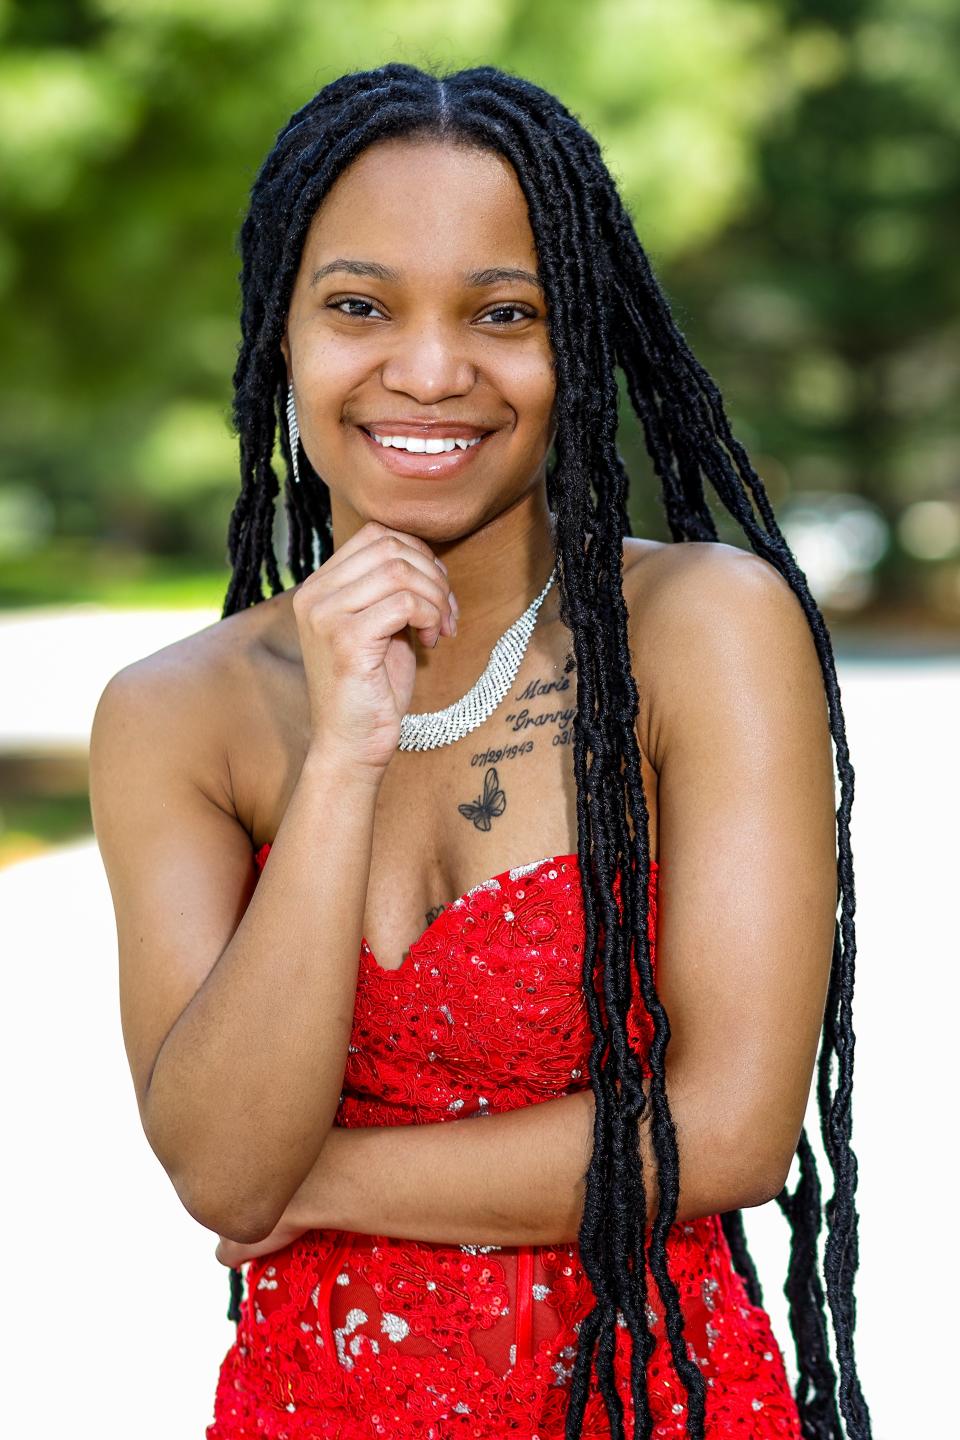 Howard High School of Technology senior Taral Mable-Pearson, 18, of Newark, will attend prom at the Inn At Mendenhall in Chadds Ford, Pennsylvania, on May 27. Mable-Pearson is pictured wearing a red dress priced around $1,000 that she borrowed from her best friend's mom's daughter on April 24. She she's still considering whether to wear this dress or the black one to prom.